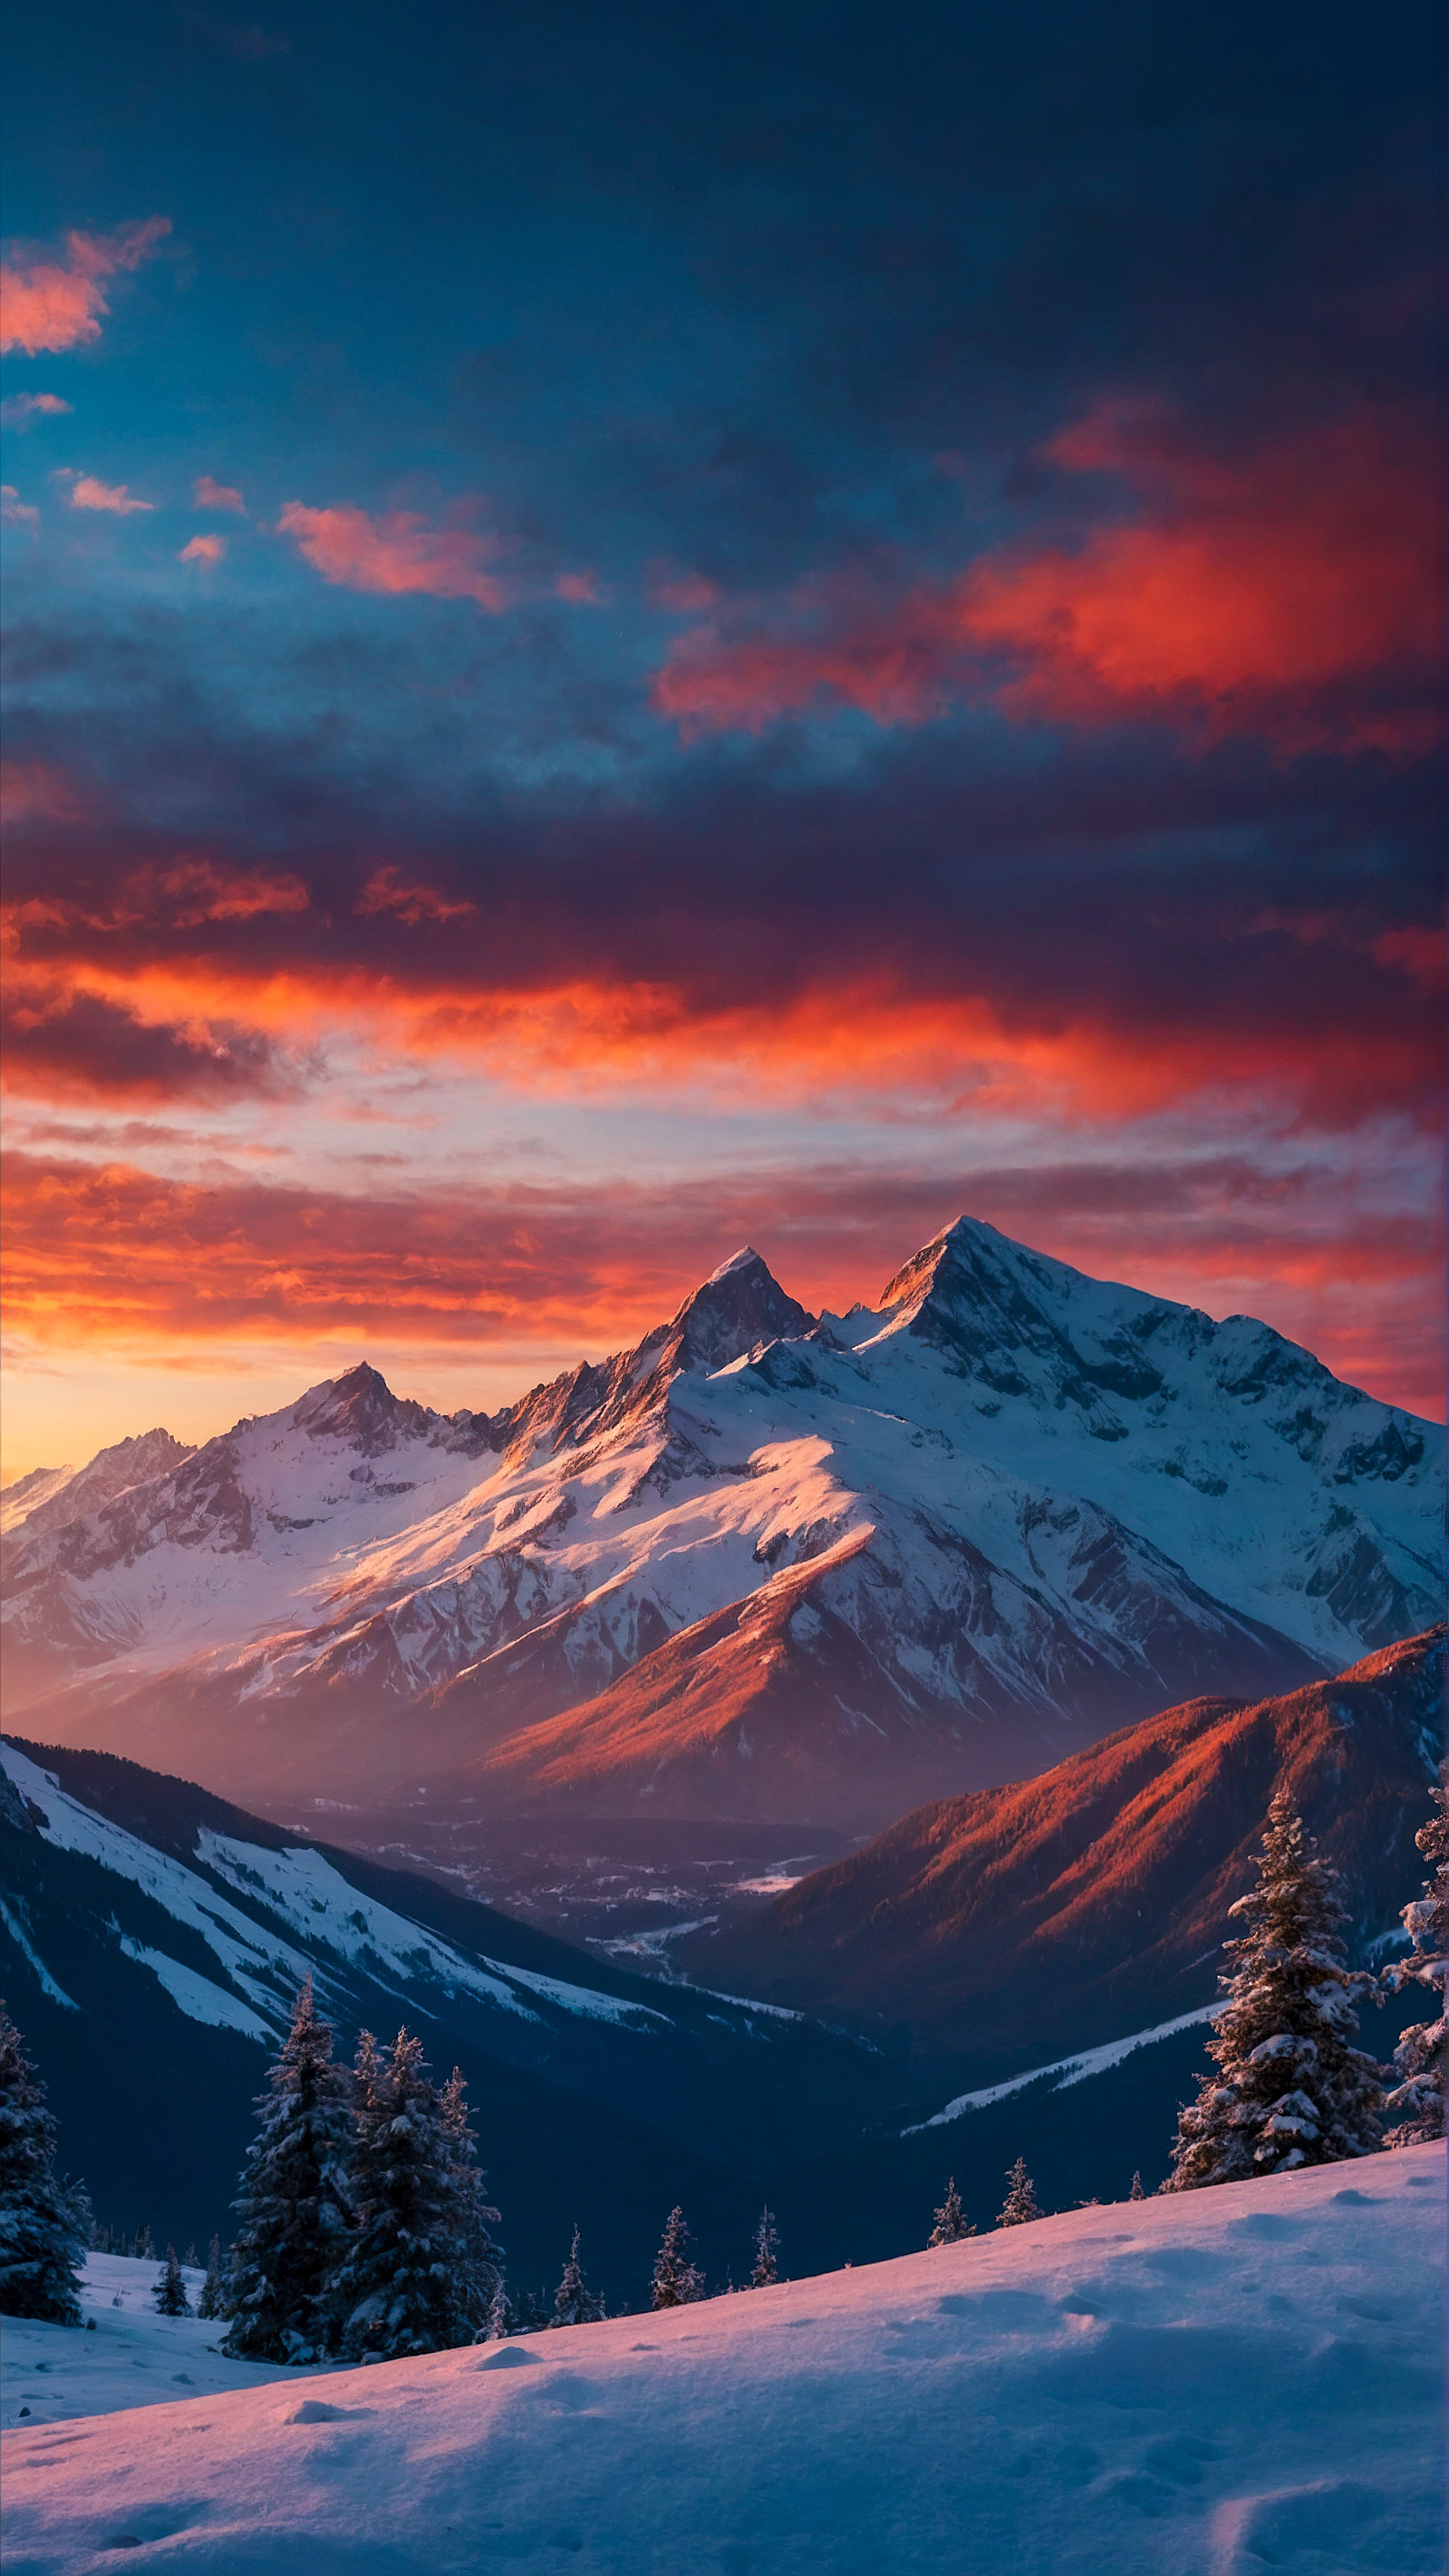 Capture the essence of natural beauty with our 4K nature wallpaper for iPhone, offering a breathtaking view of snow-covered mountains under a vibrant, colorful sky at dusk.